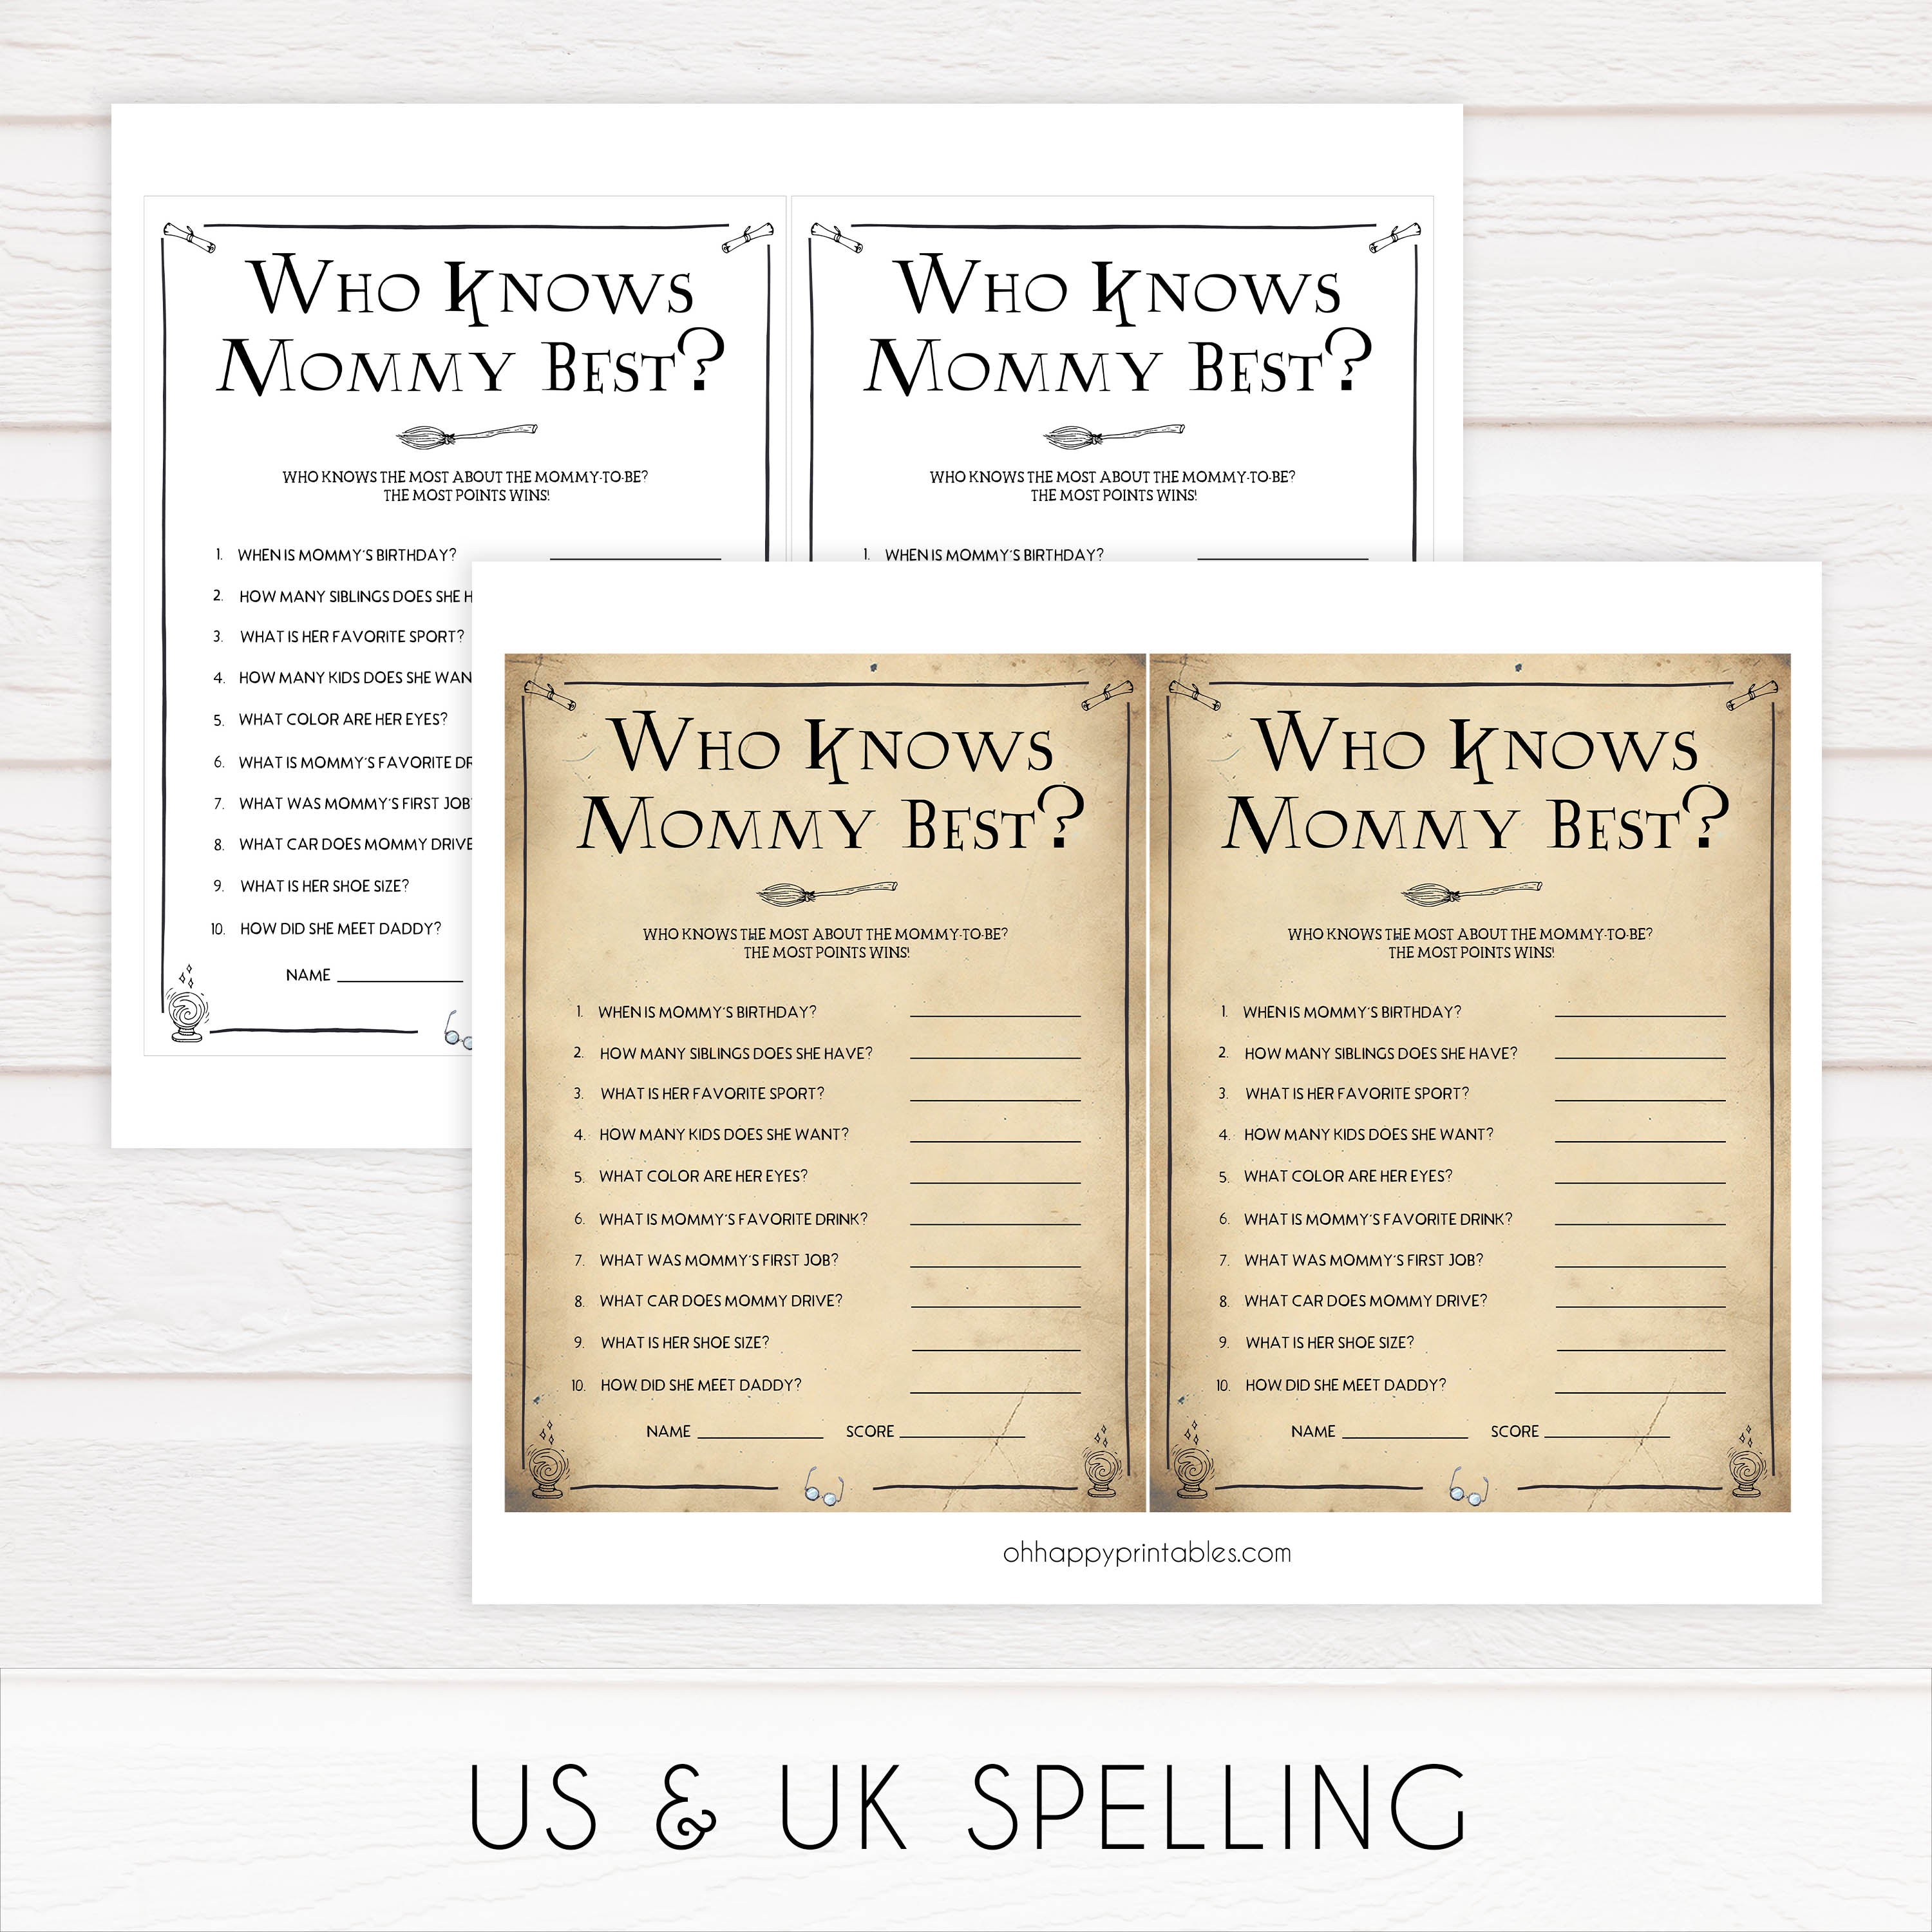 Who Knows Mummy Best Baby Game, Wizard baby shower games, printable baby shower games, Harry Potter baby games, Harry Potter baby shower, fun baby shower games,  fun baby ideas